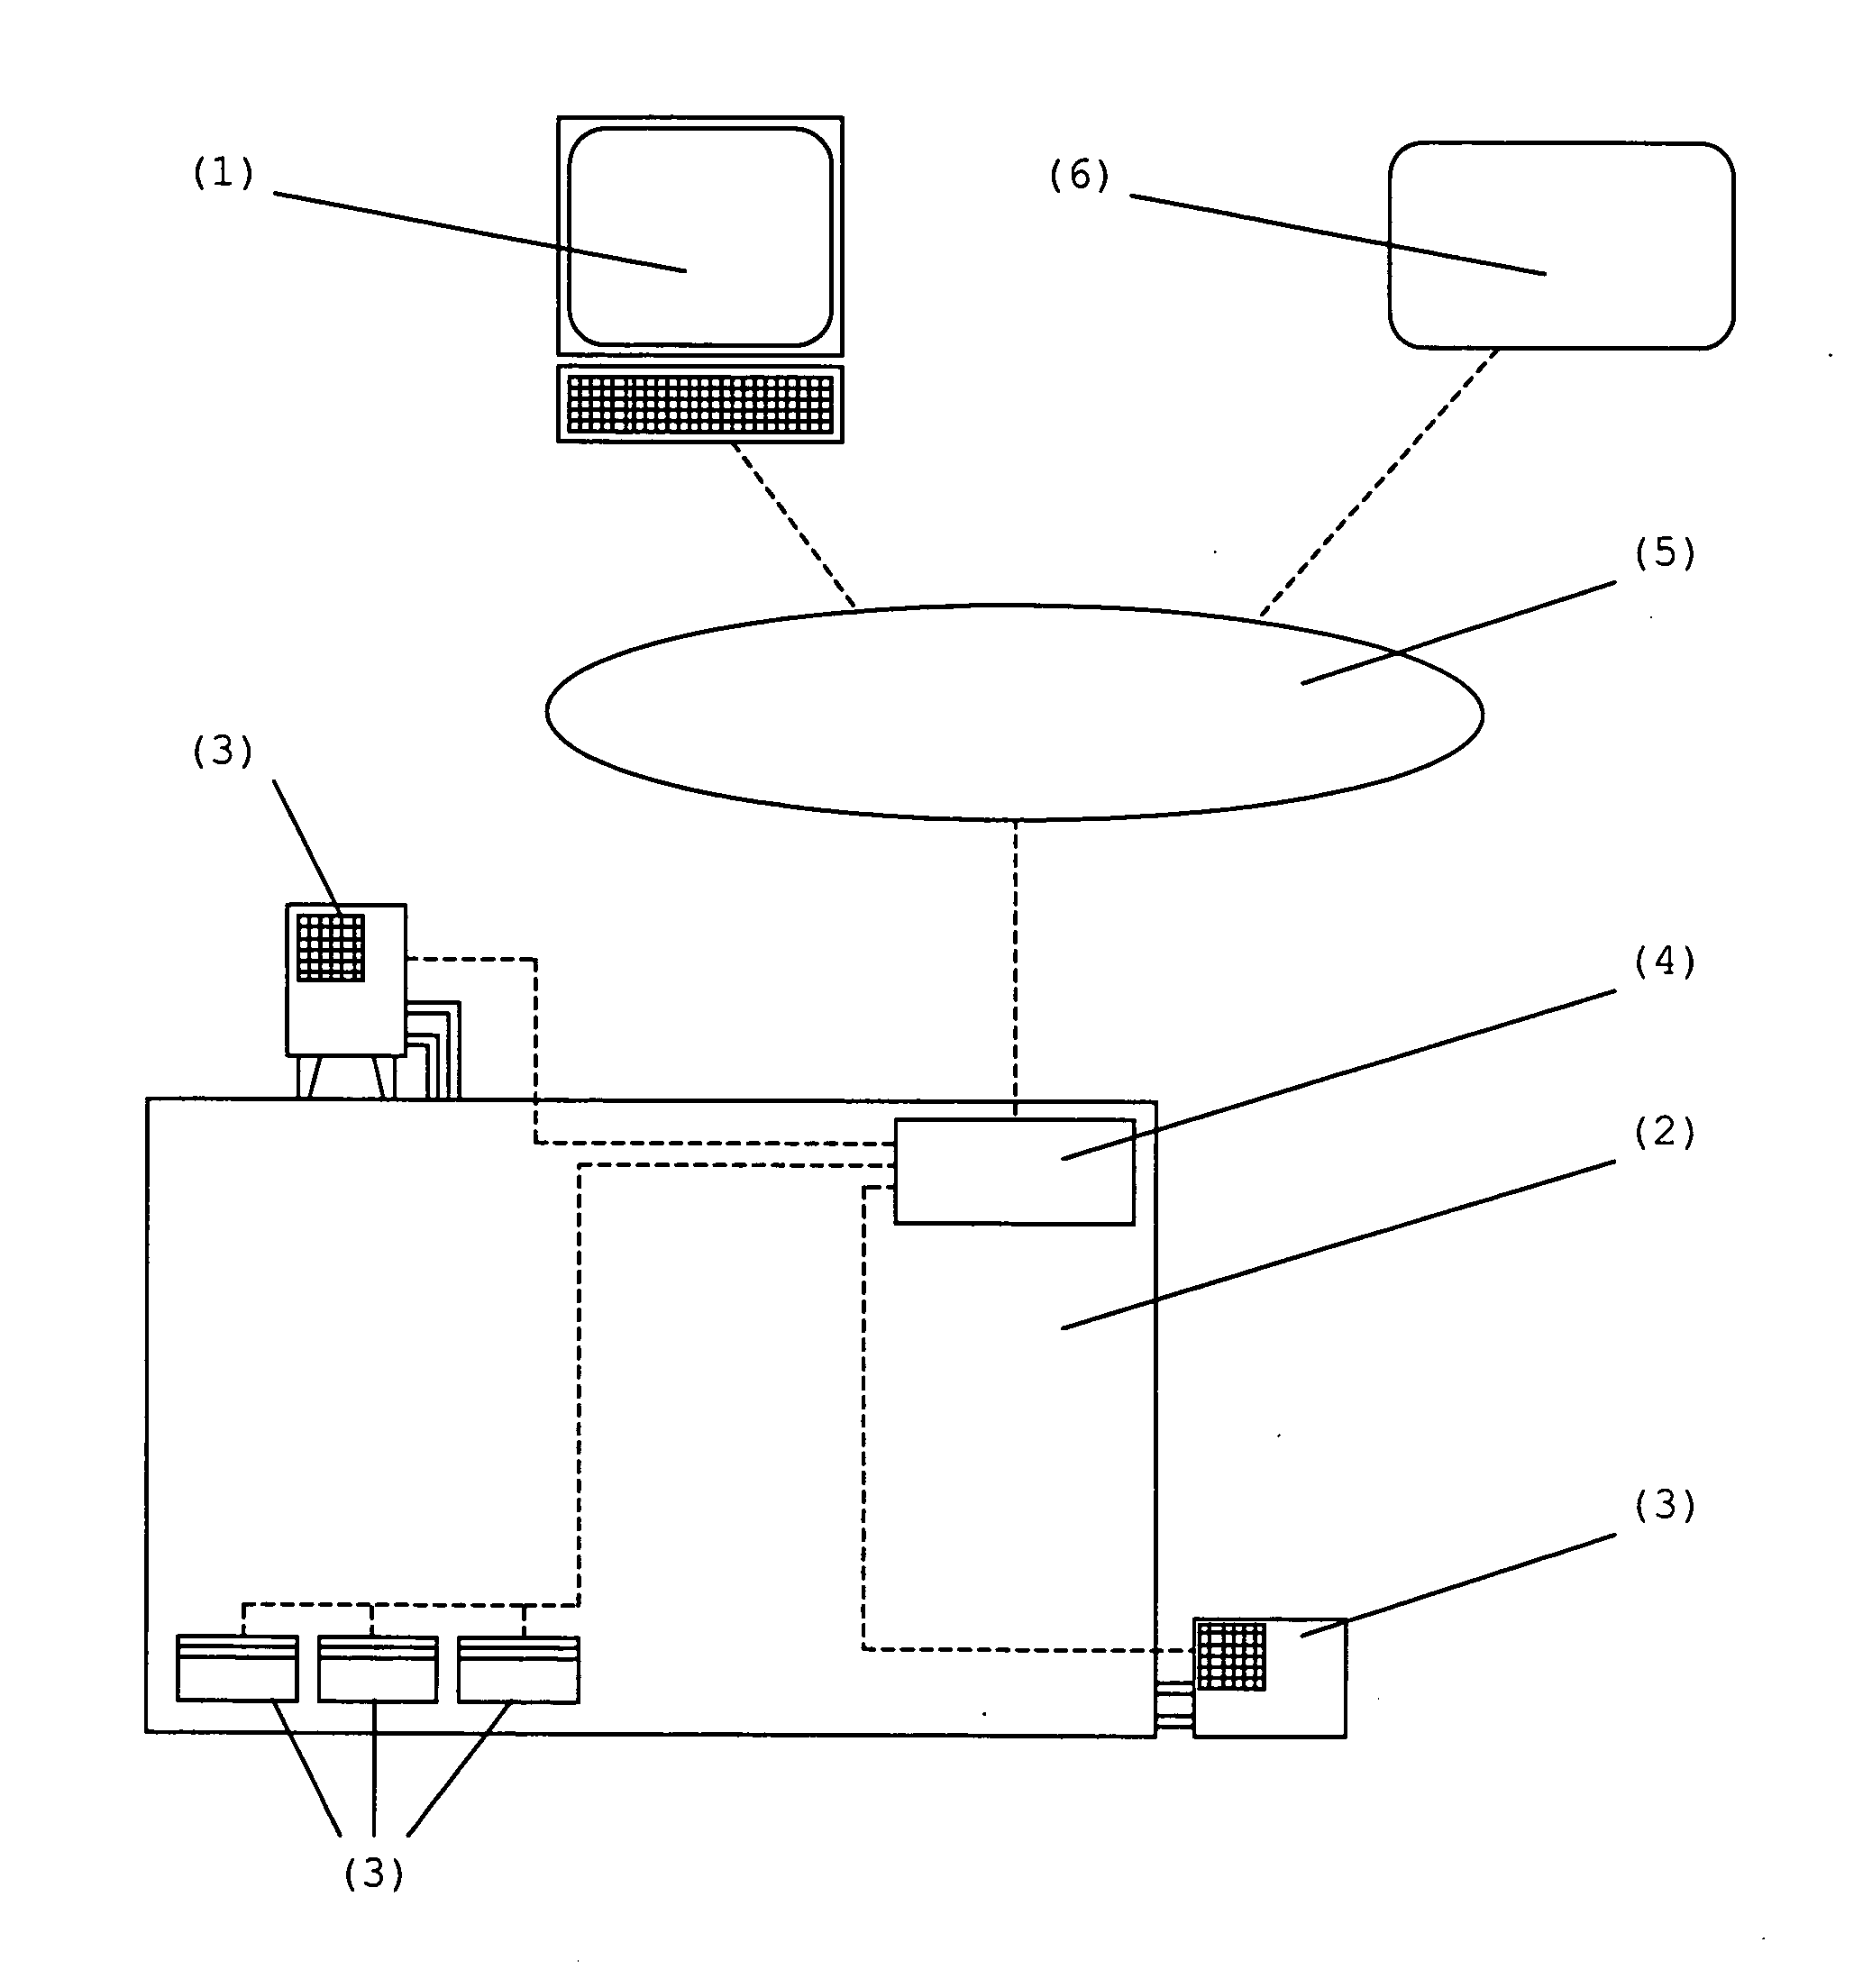 System and method of controlling environmental conditioning equipment in an enclosure